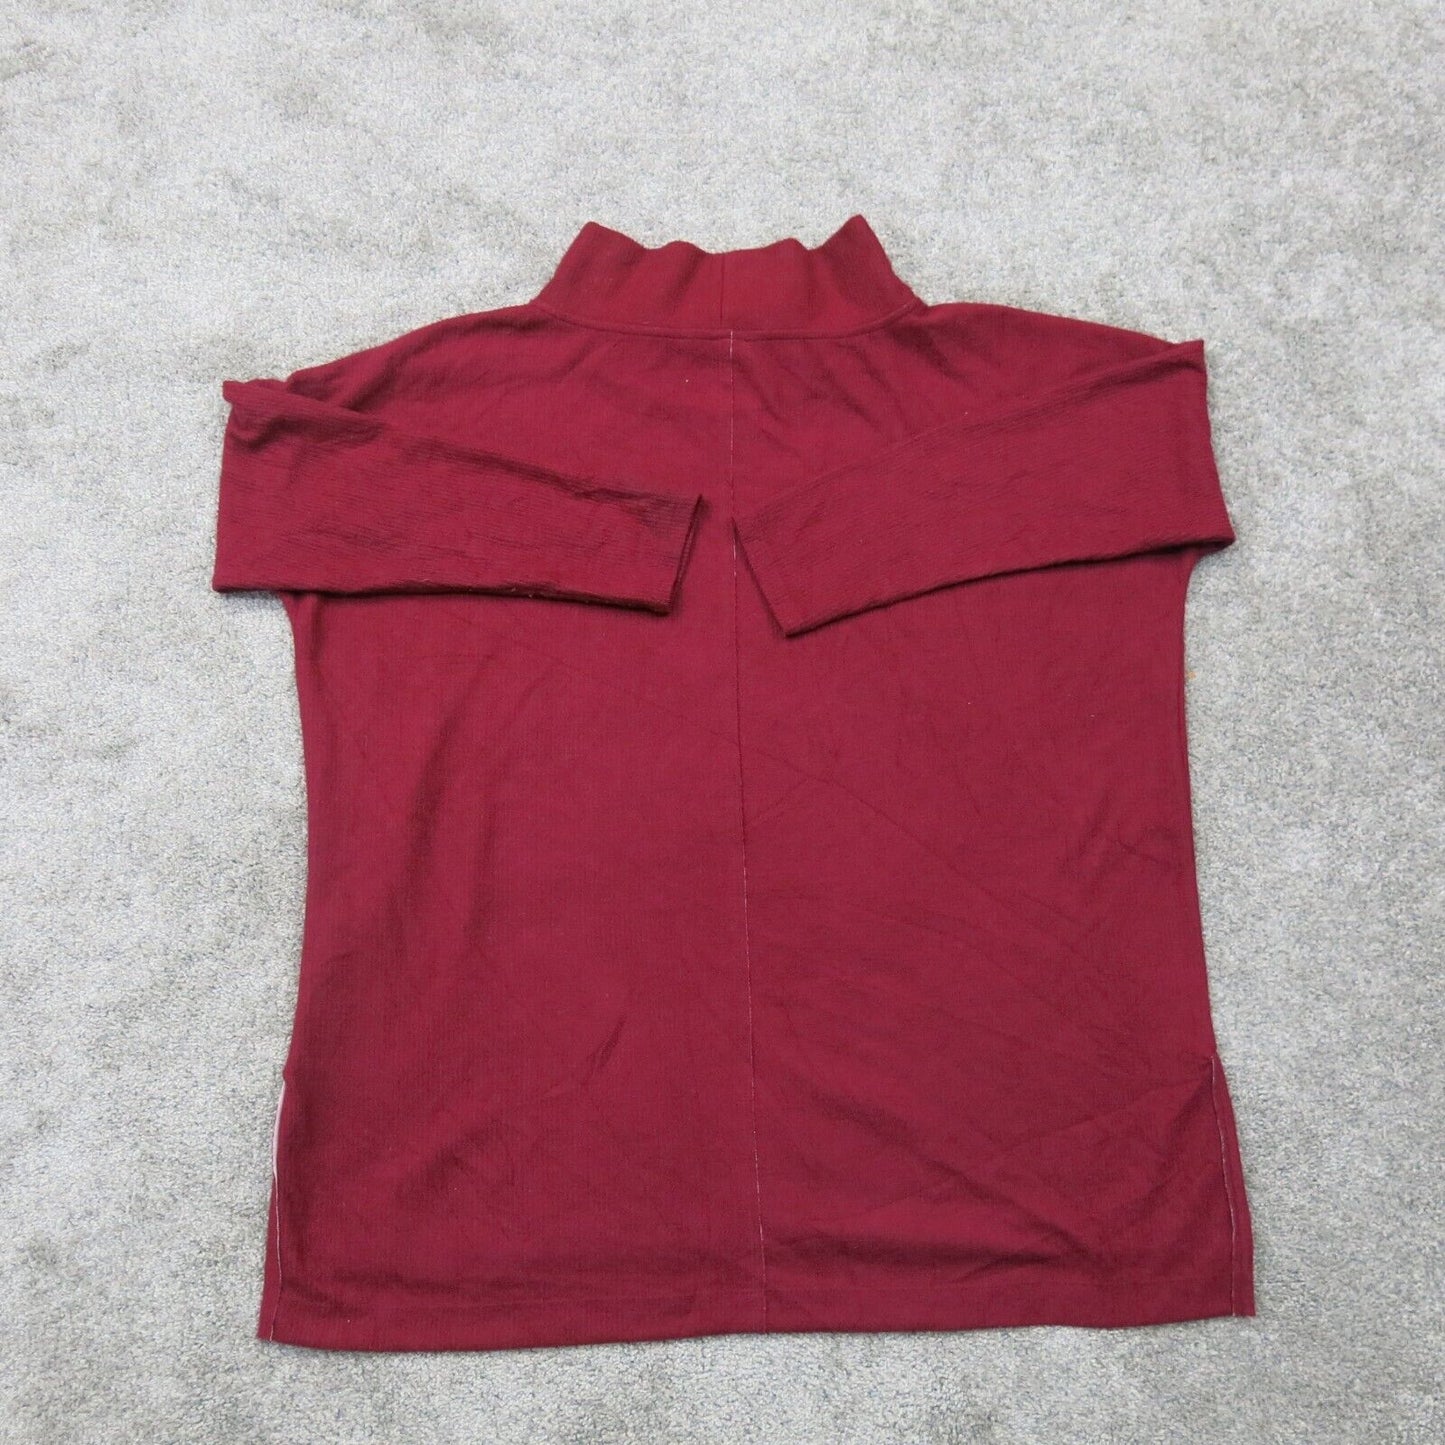 Anthropology Womens Pullover Shirt Jacket Long Sleeves Mock Neck Red Size Large